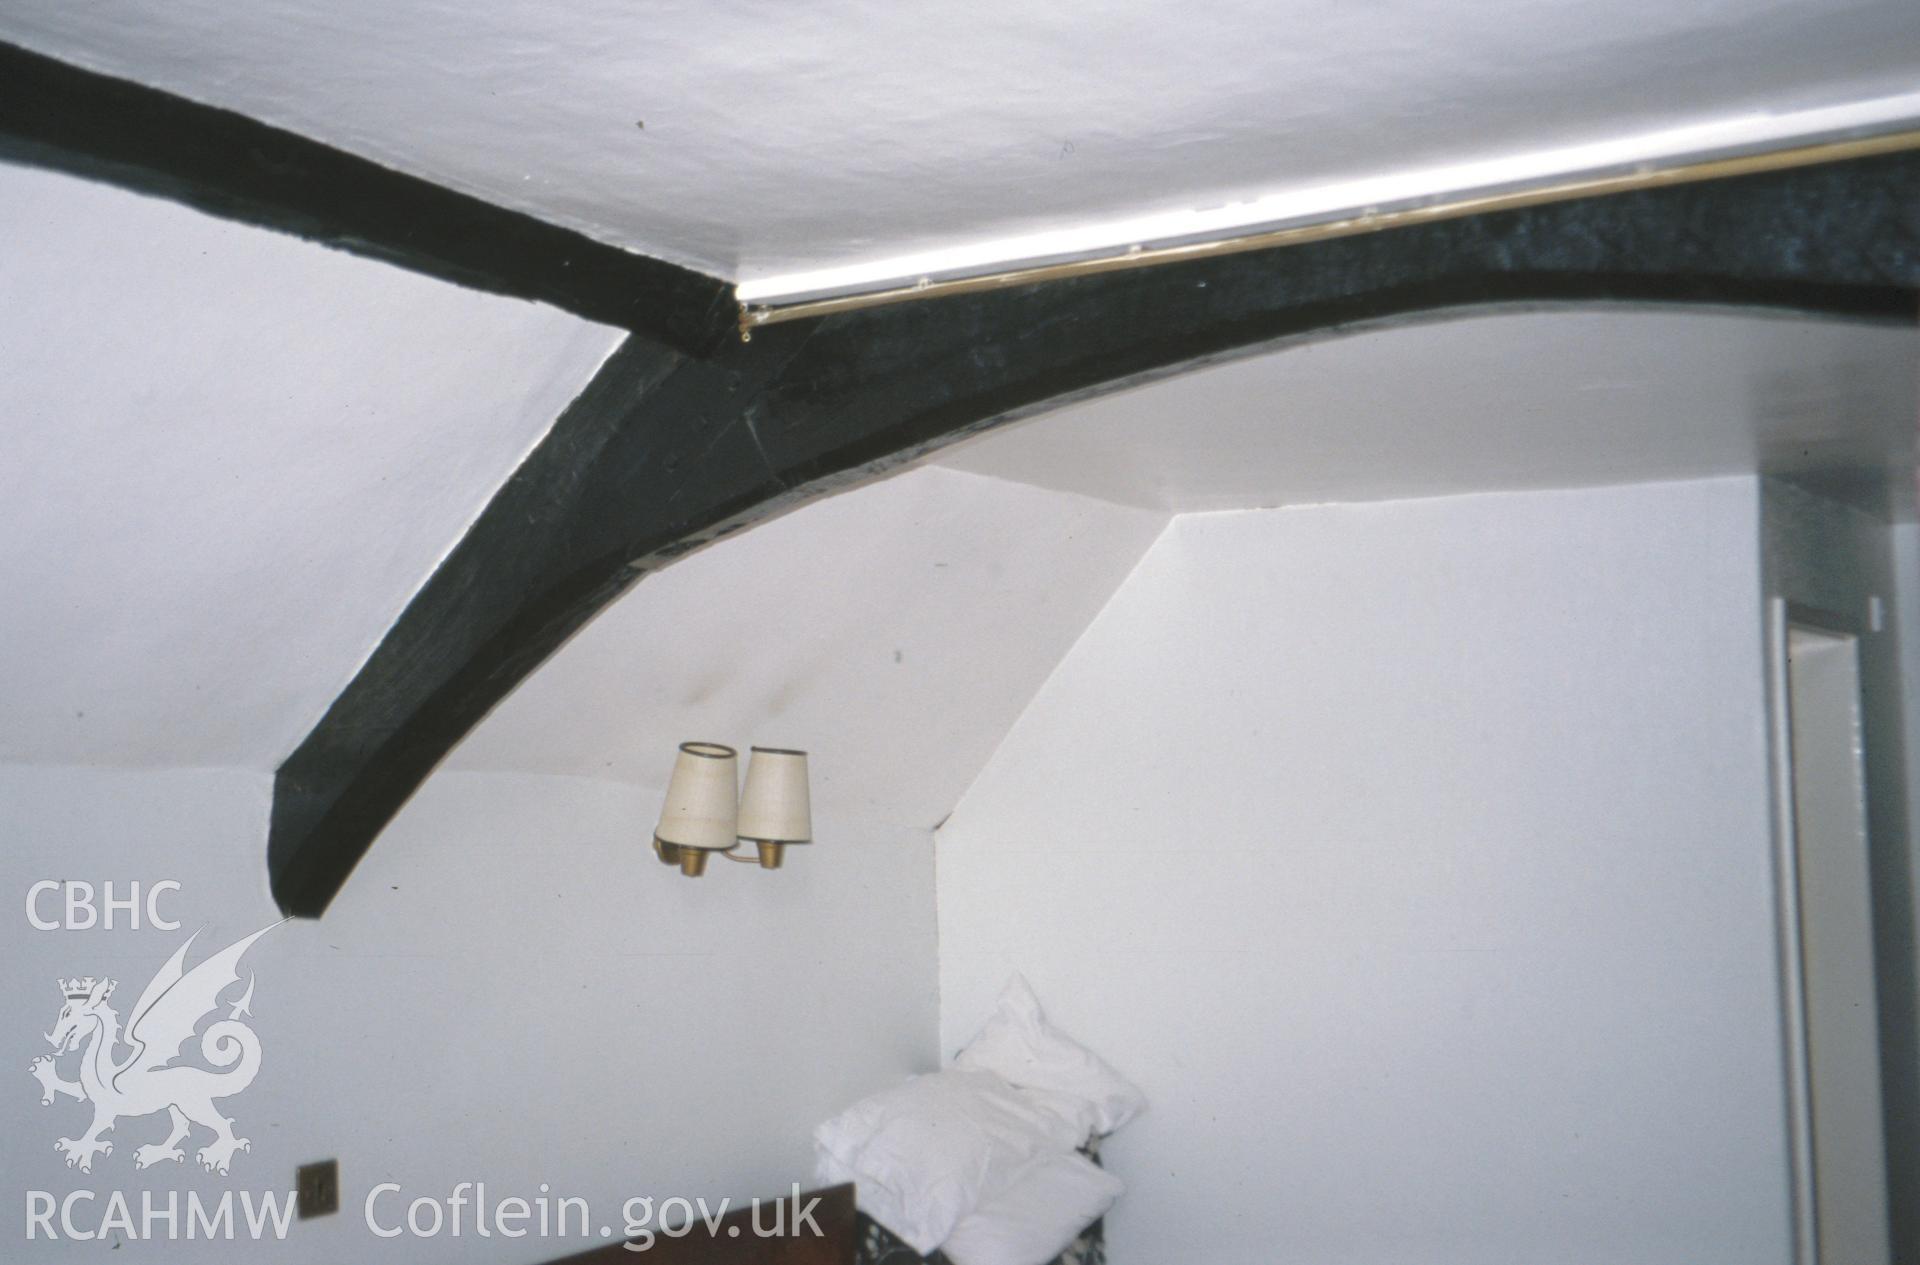 Interior view showing arched collar truss to the room above the porch.